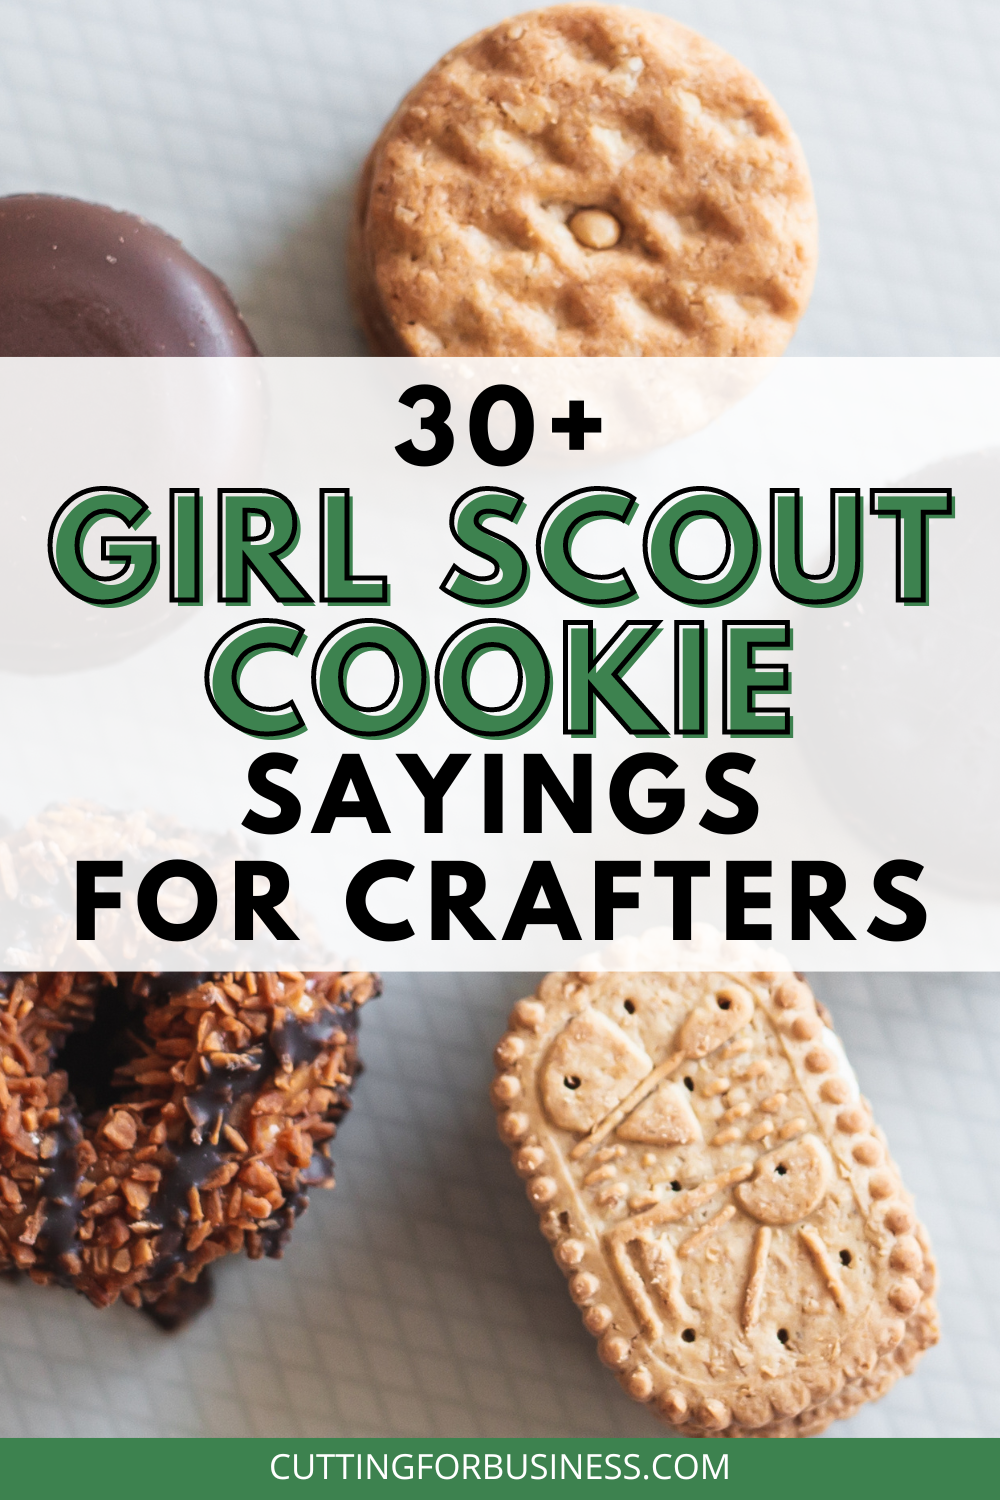 30+ Girl Scout Cookie Sayings for Crafters - cuttingforbusiness.com